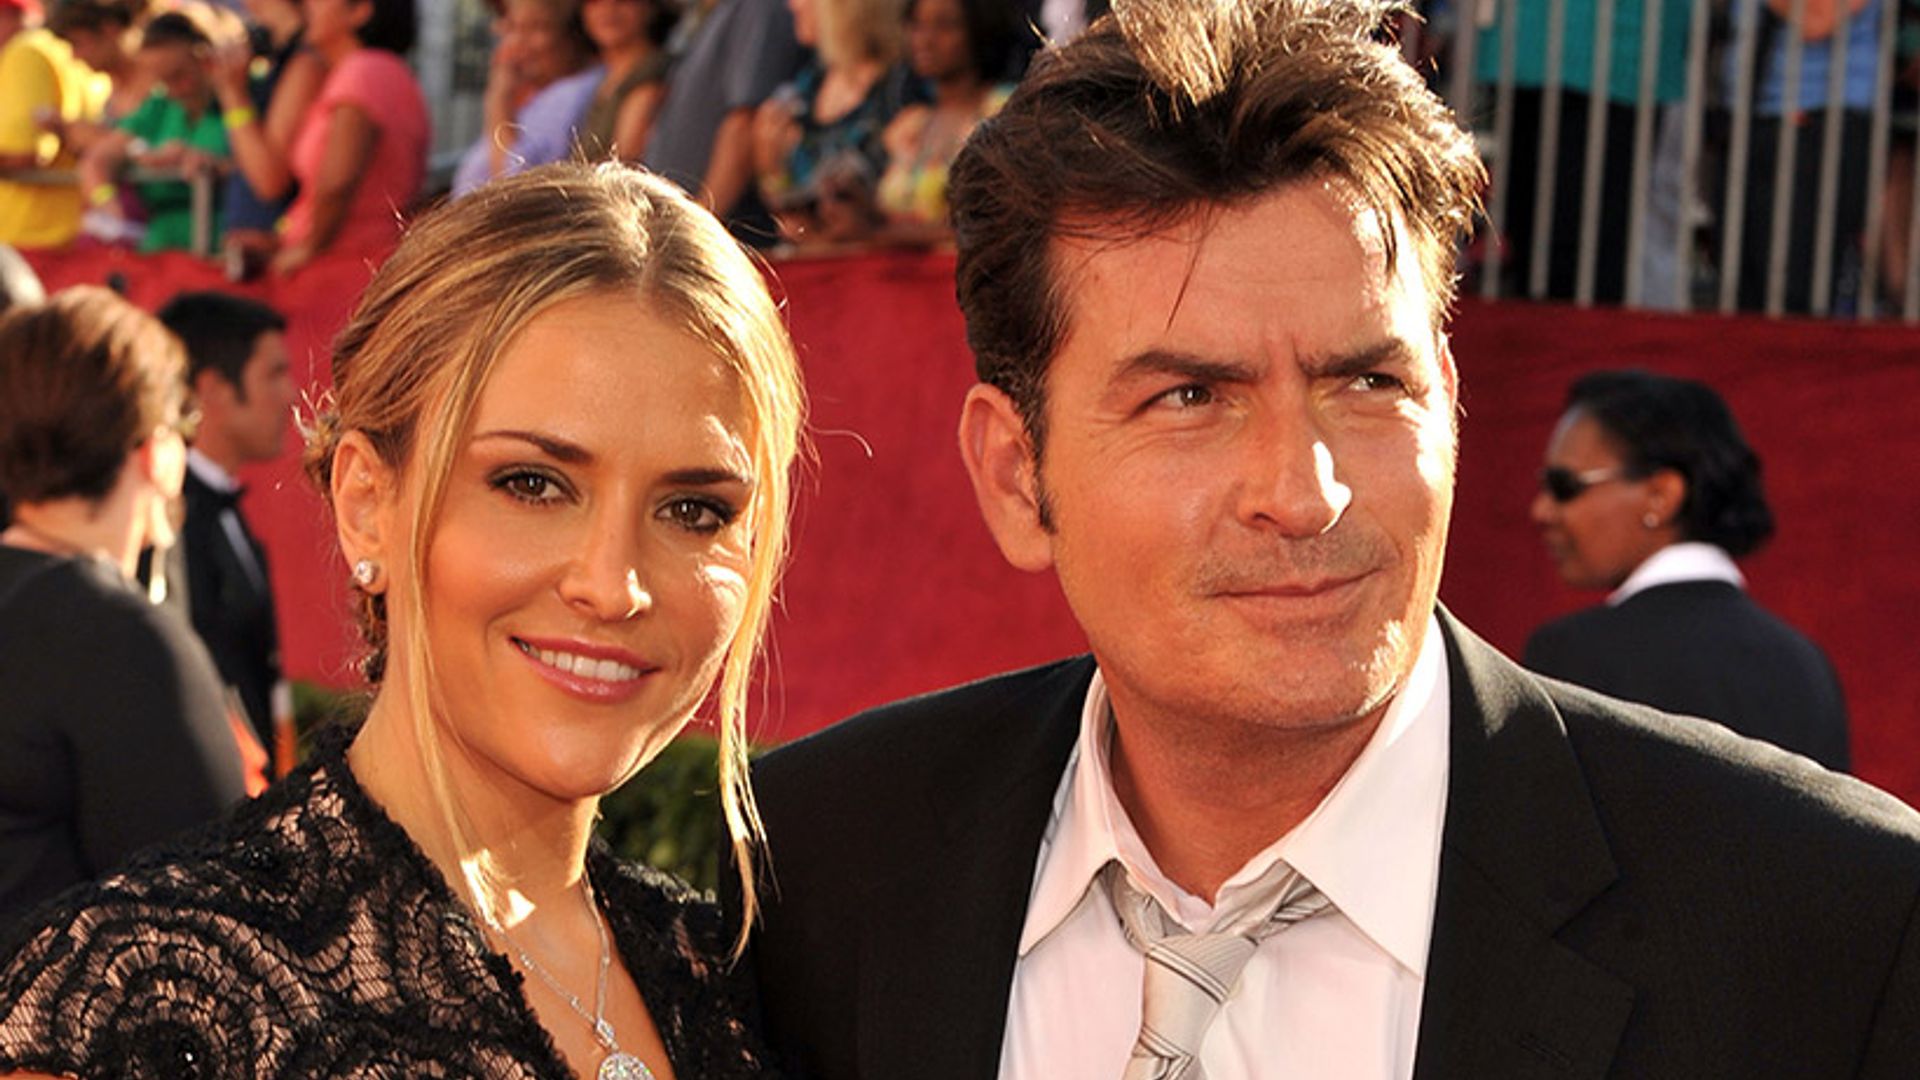 Charlie Sheen's twins sons found safely: ex-wife Brooke Mueller hospitalised